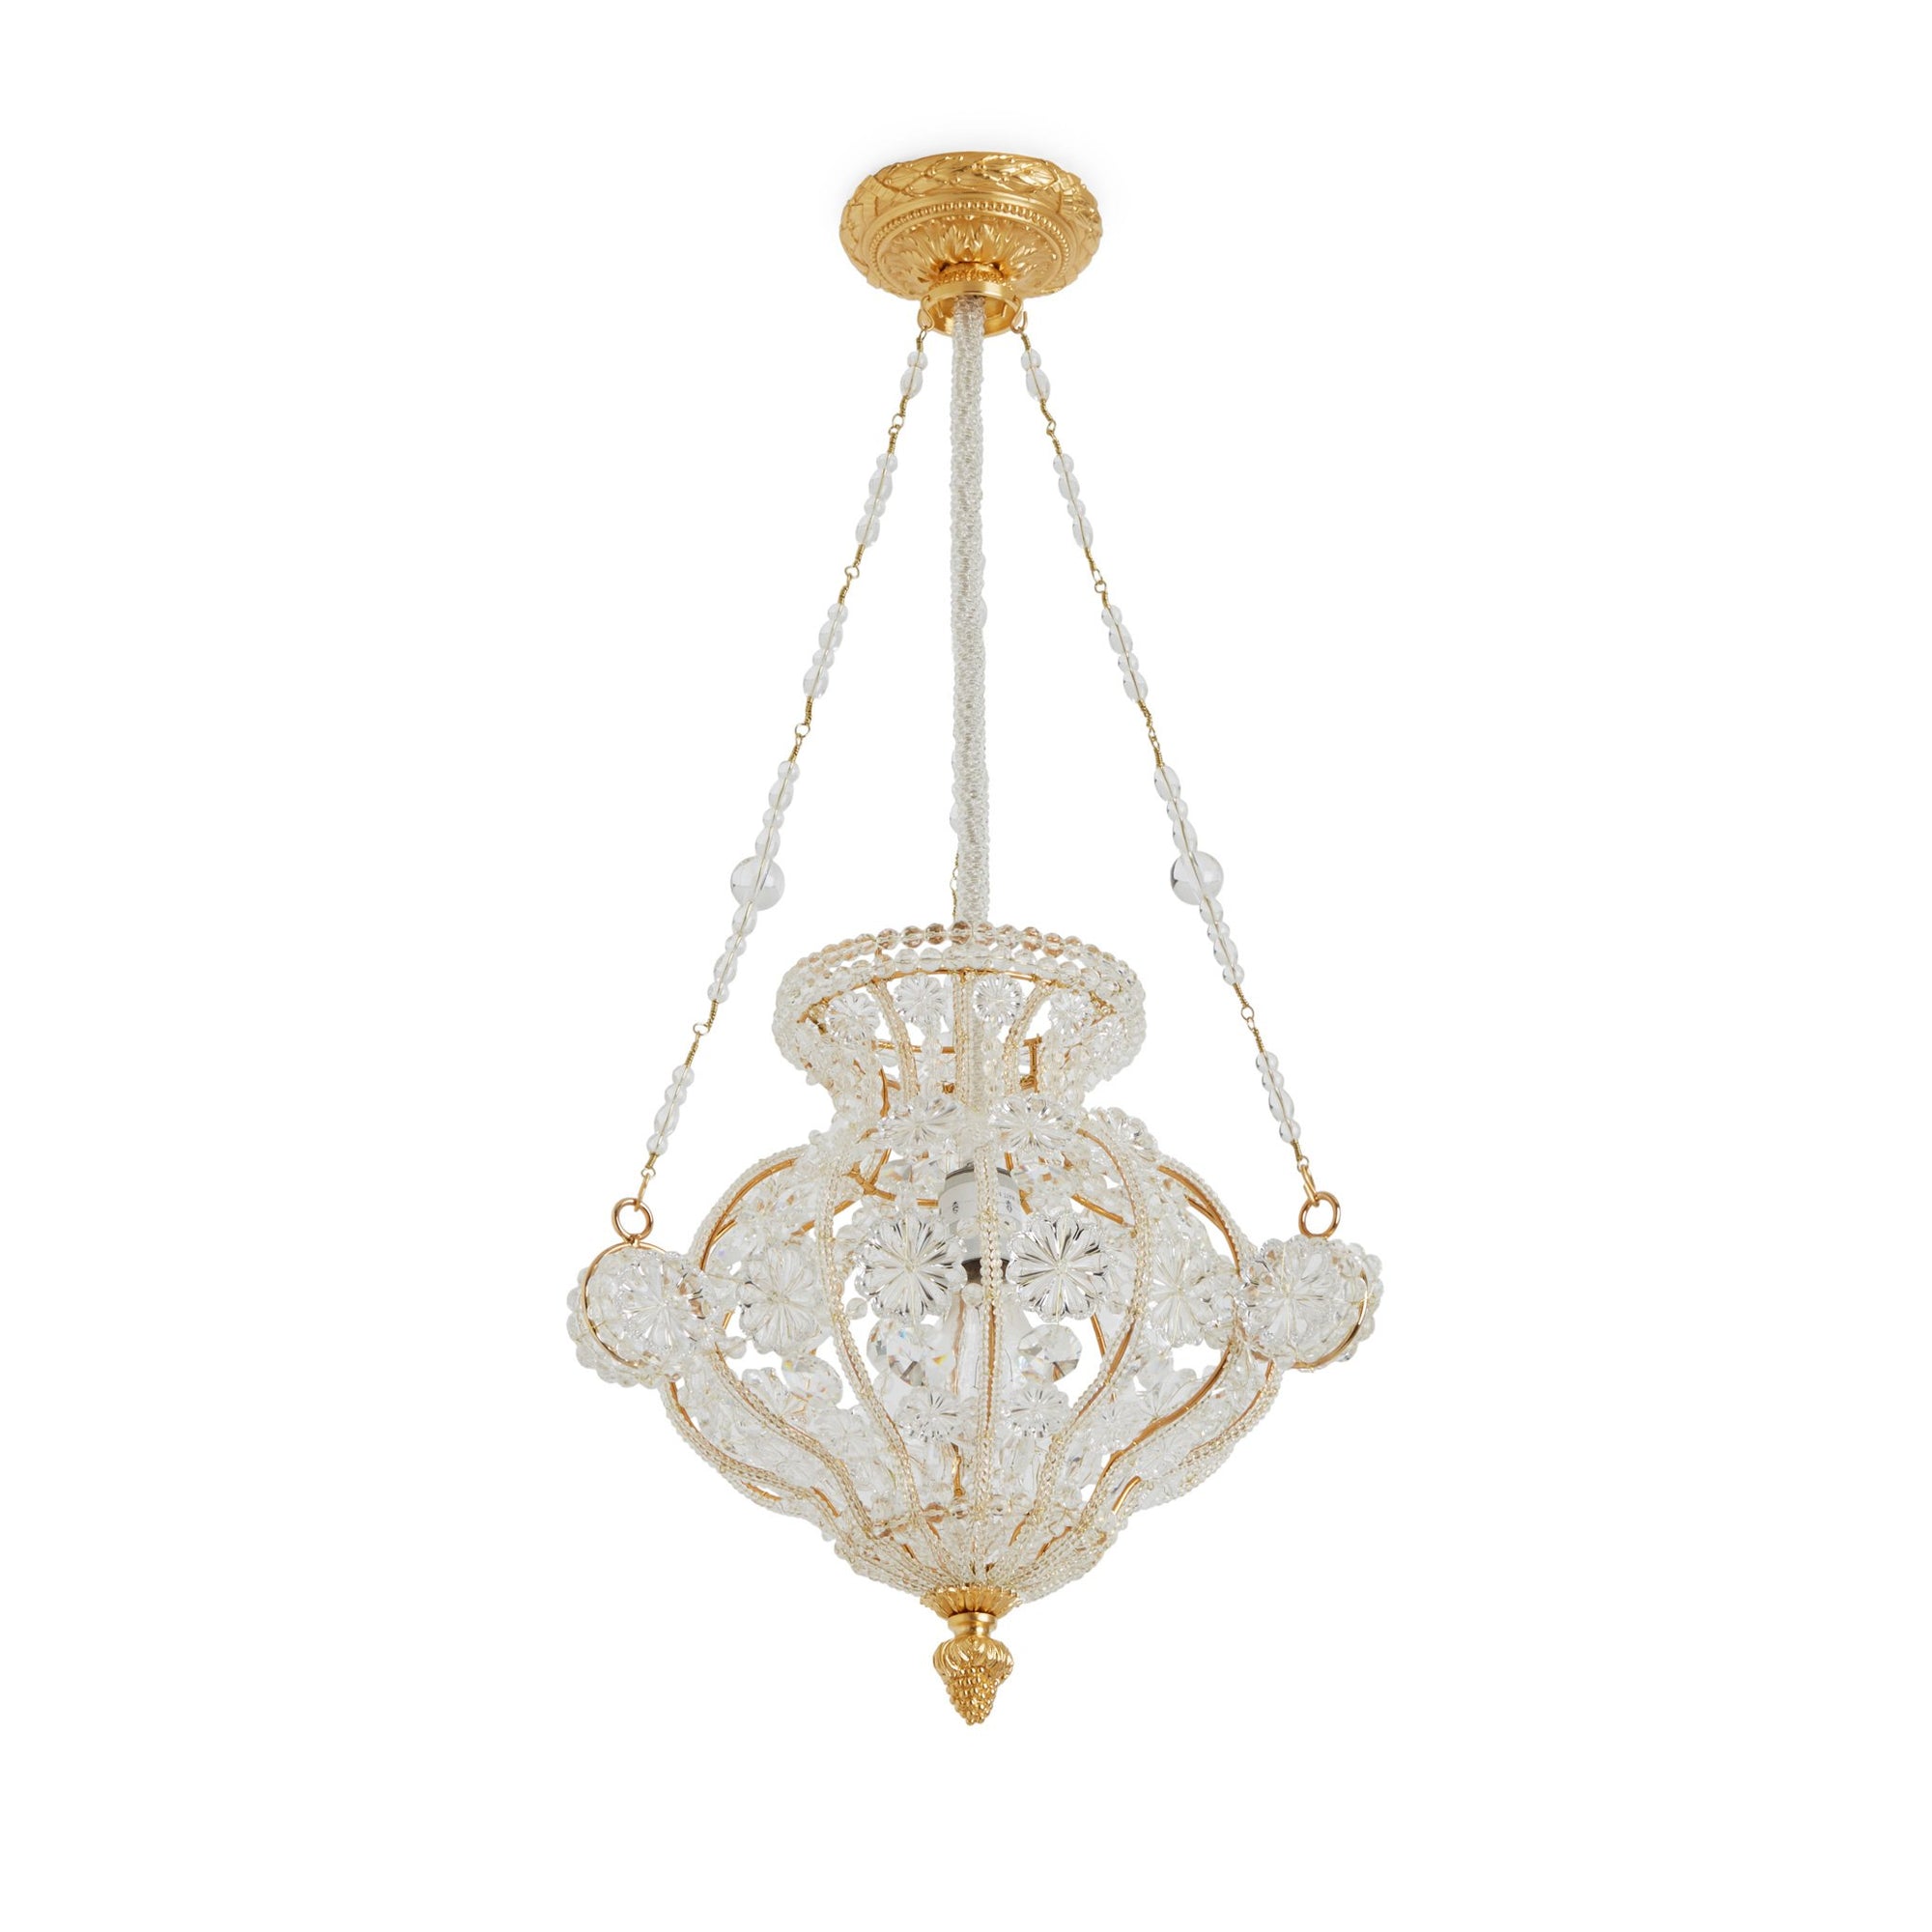 7122LX-GP Sherle Wagner International Crystal Chandelier with Louis XVI Canopy in Gold plate metal finish